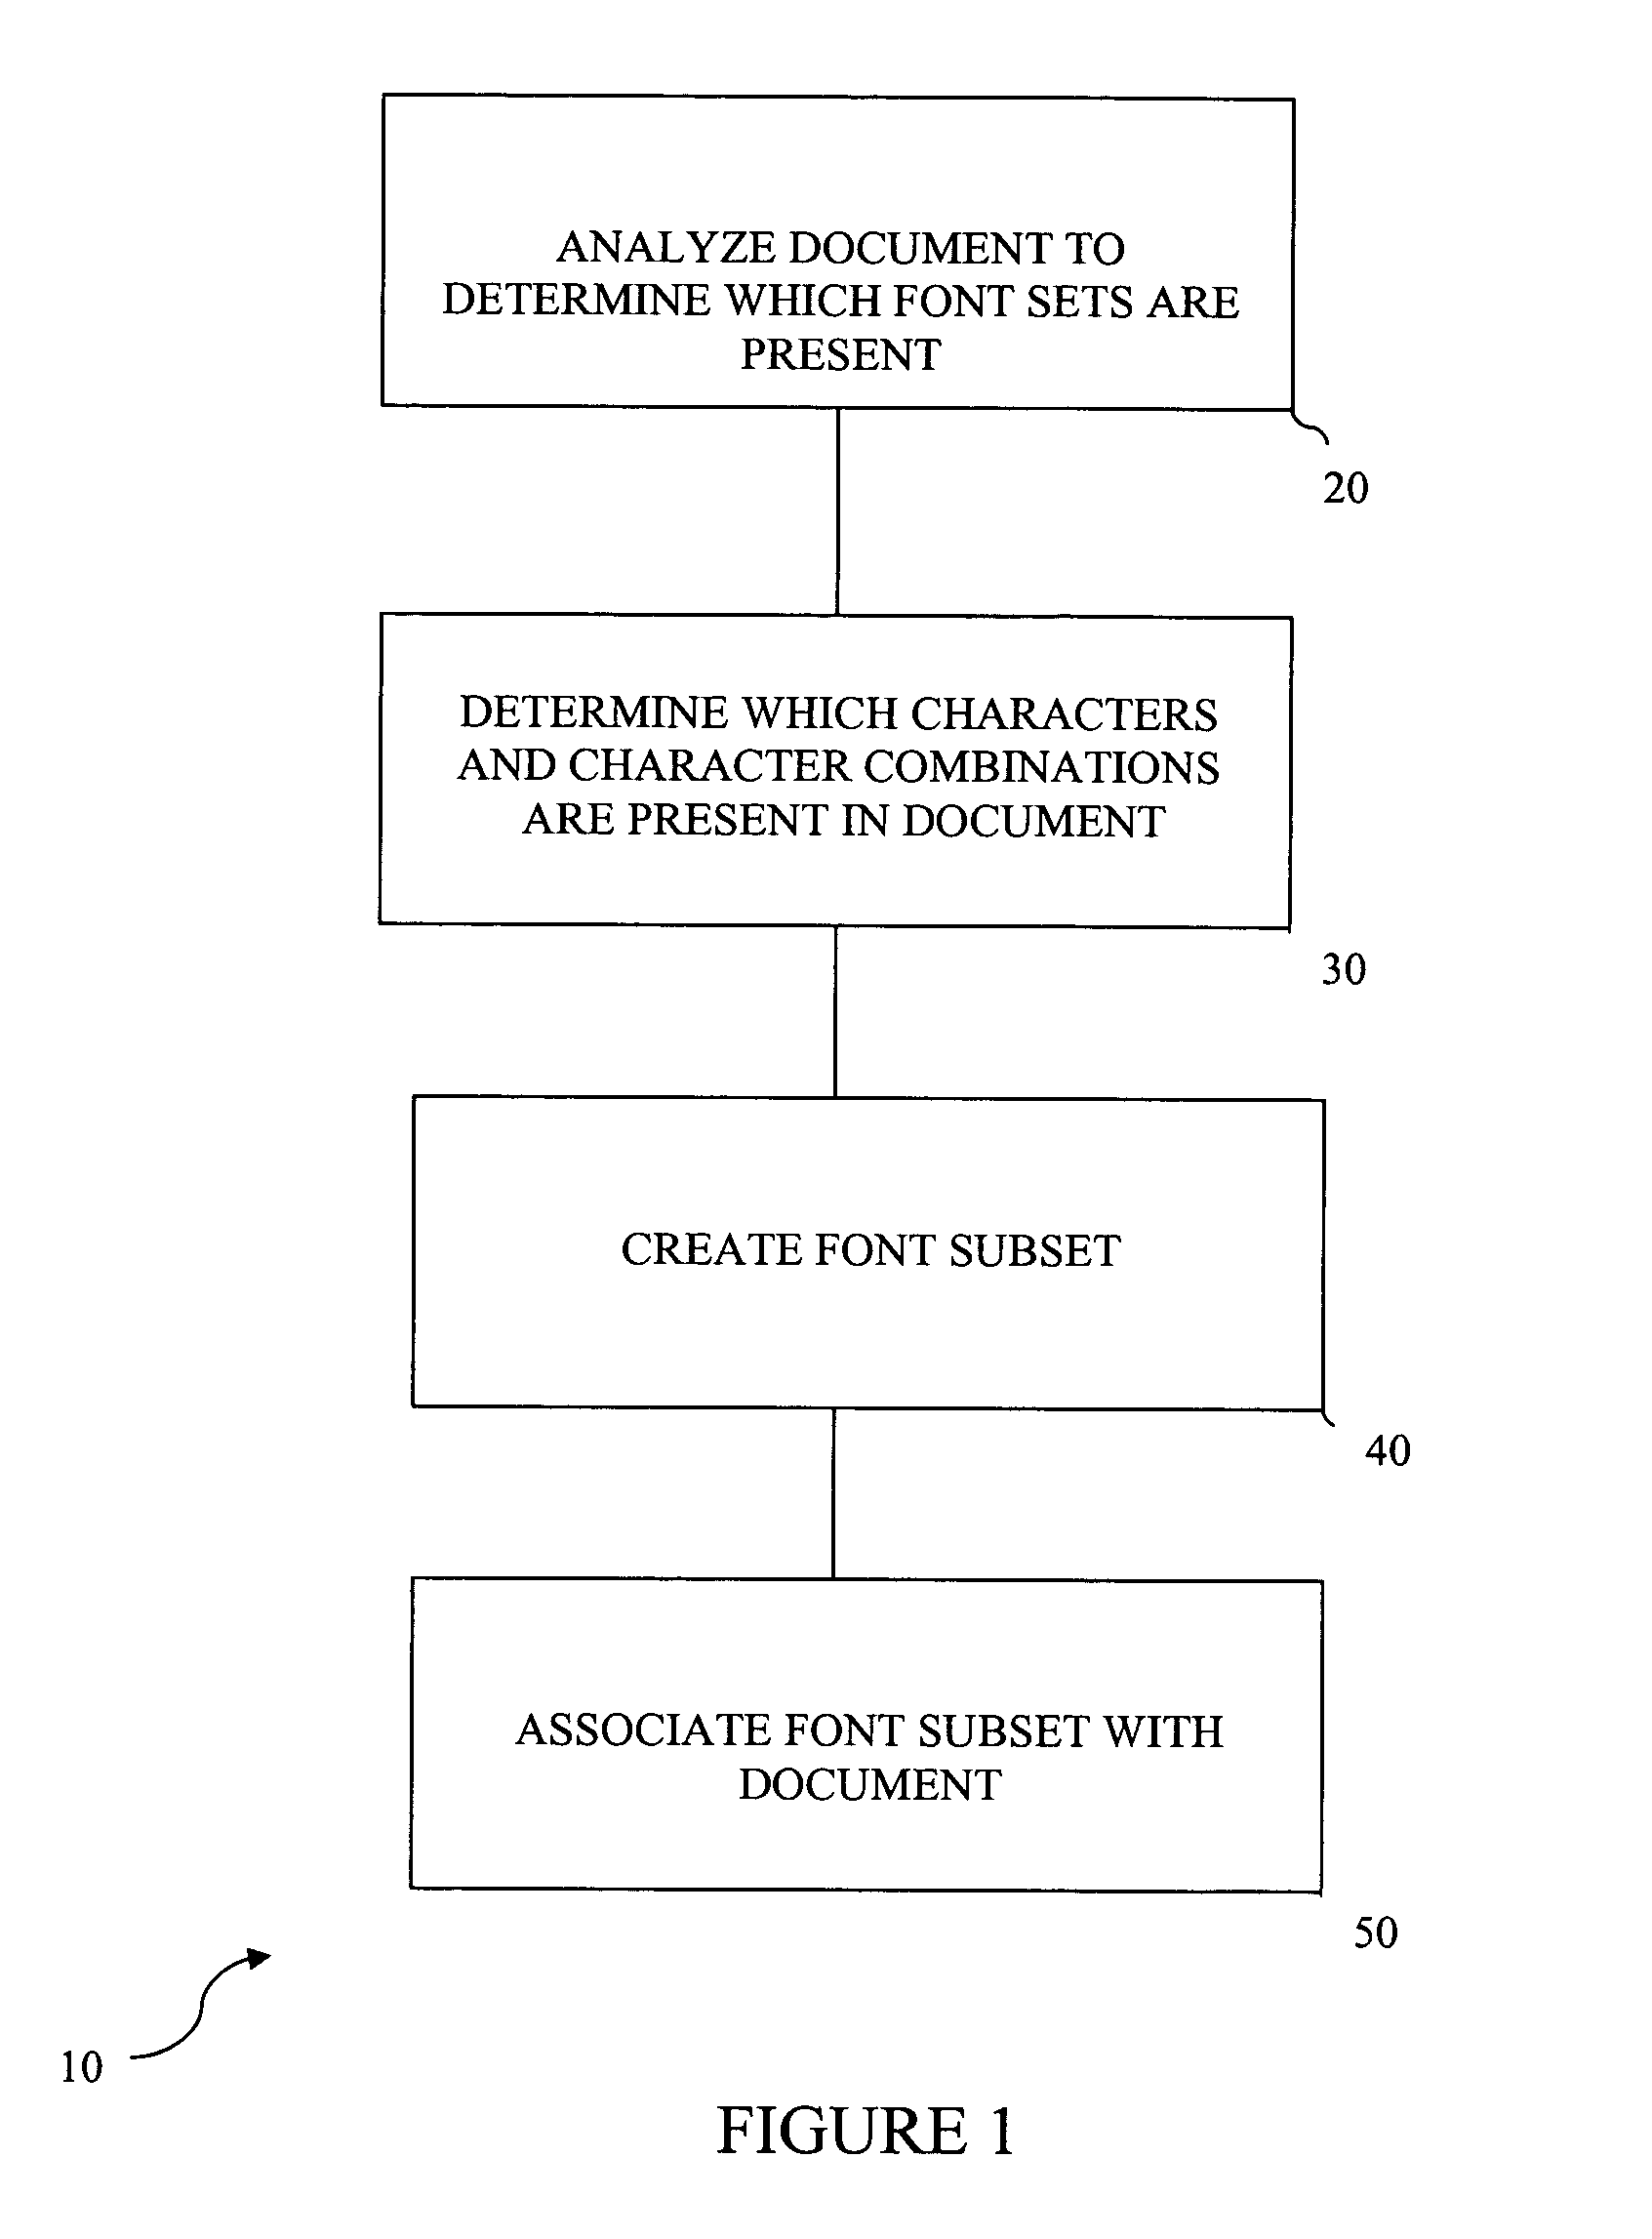 Method and apparatus for associating with an electronic document a font subset containing select character forms which are different depending on location